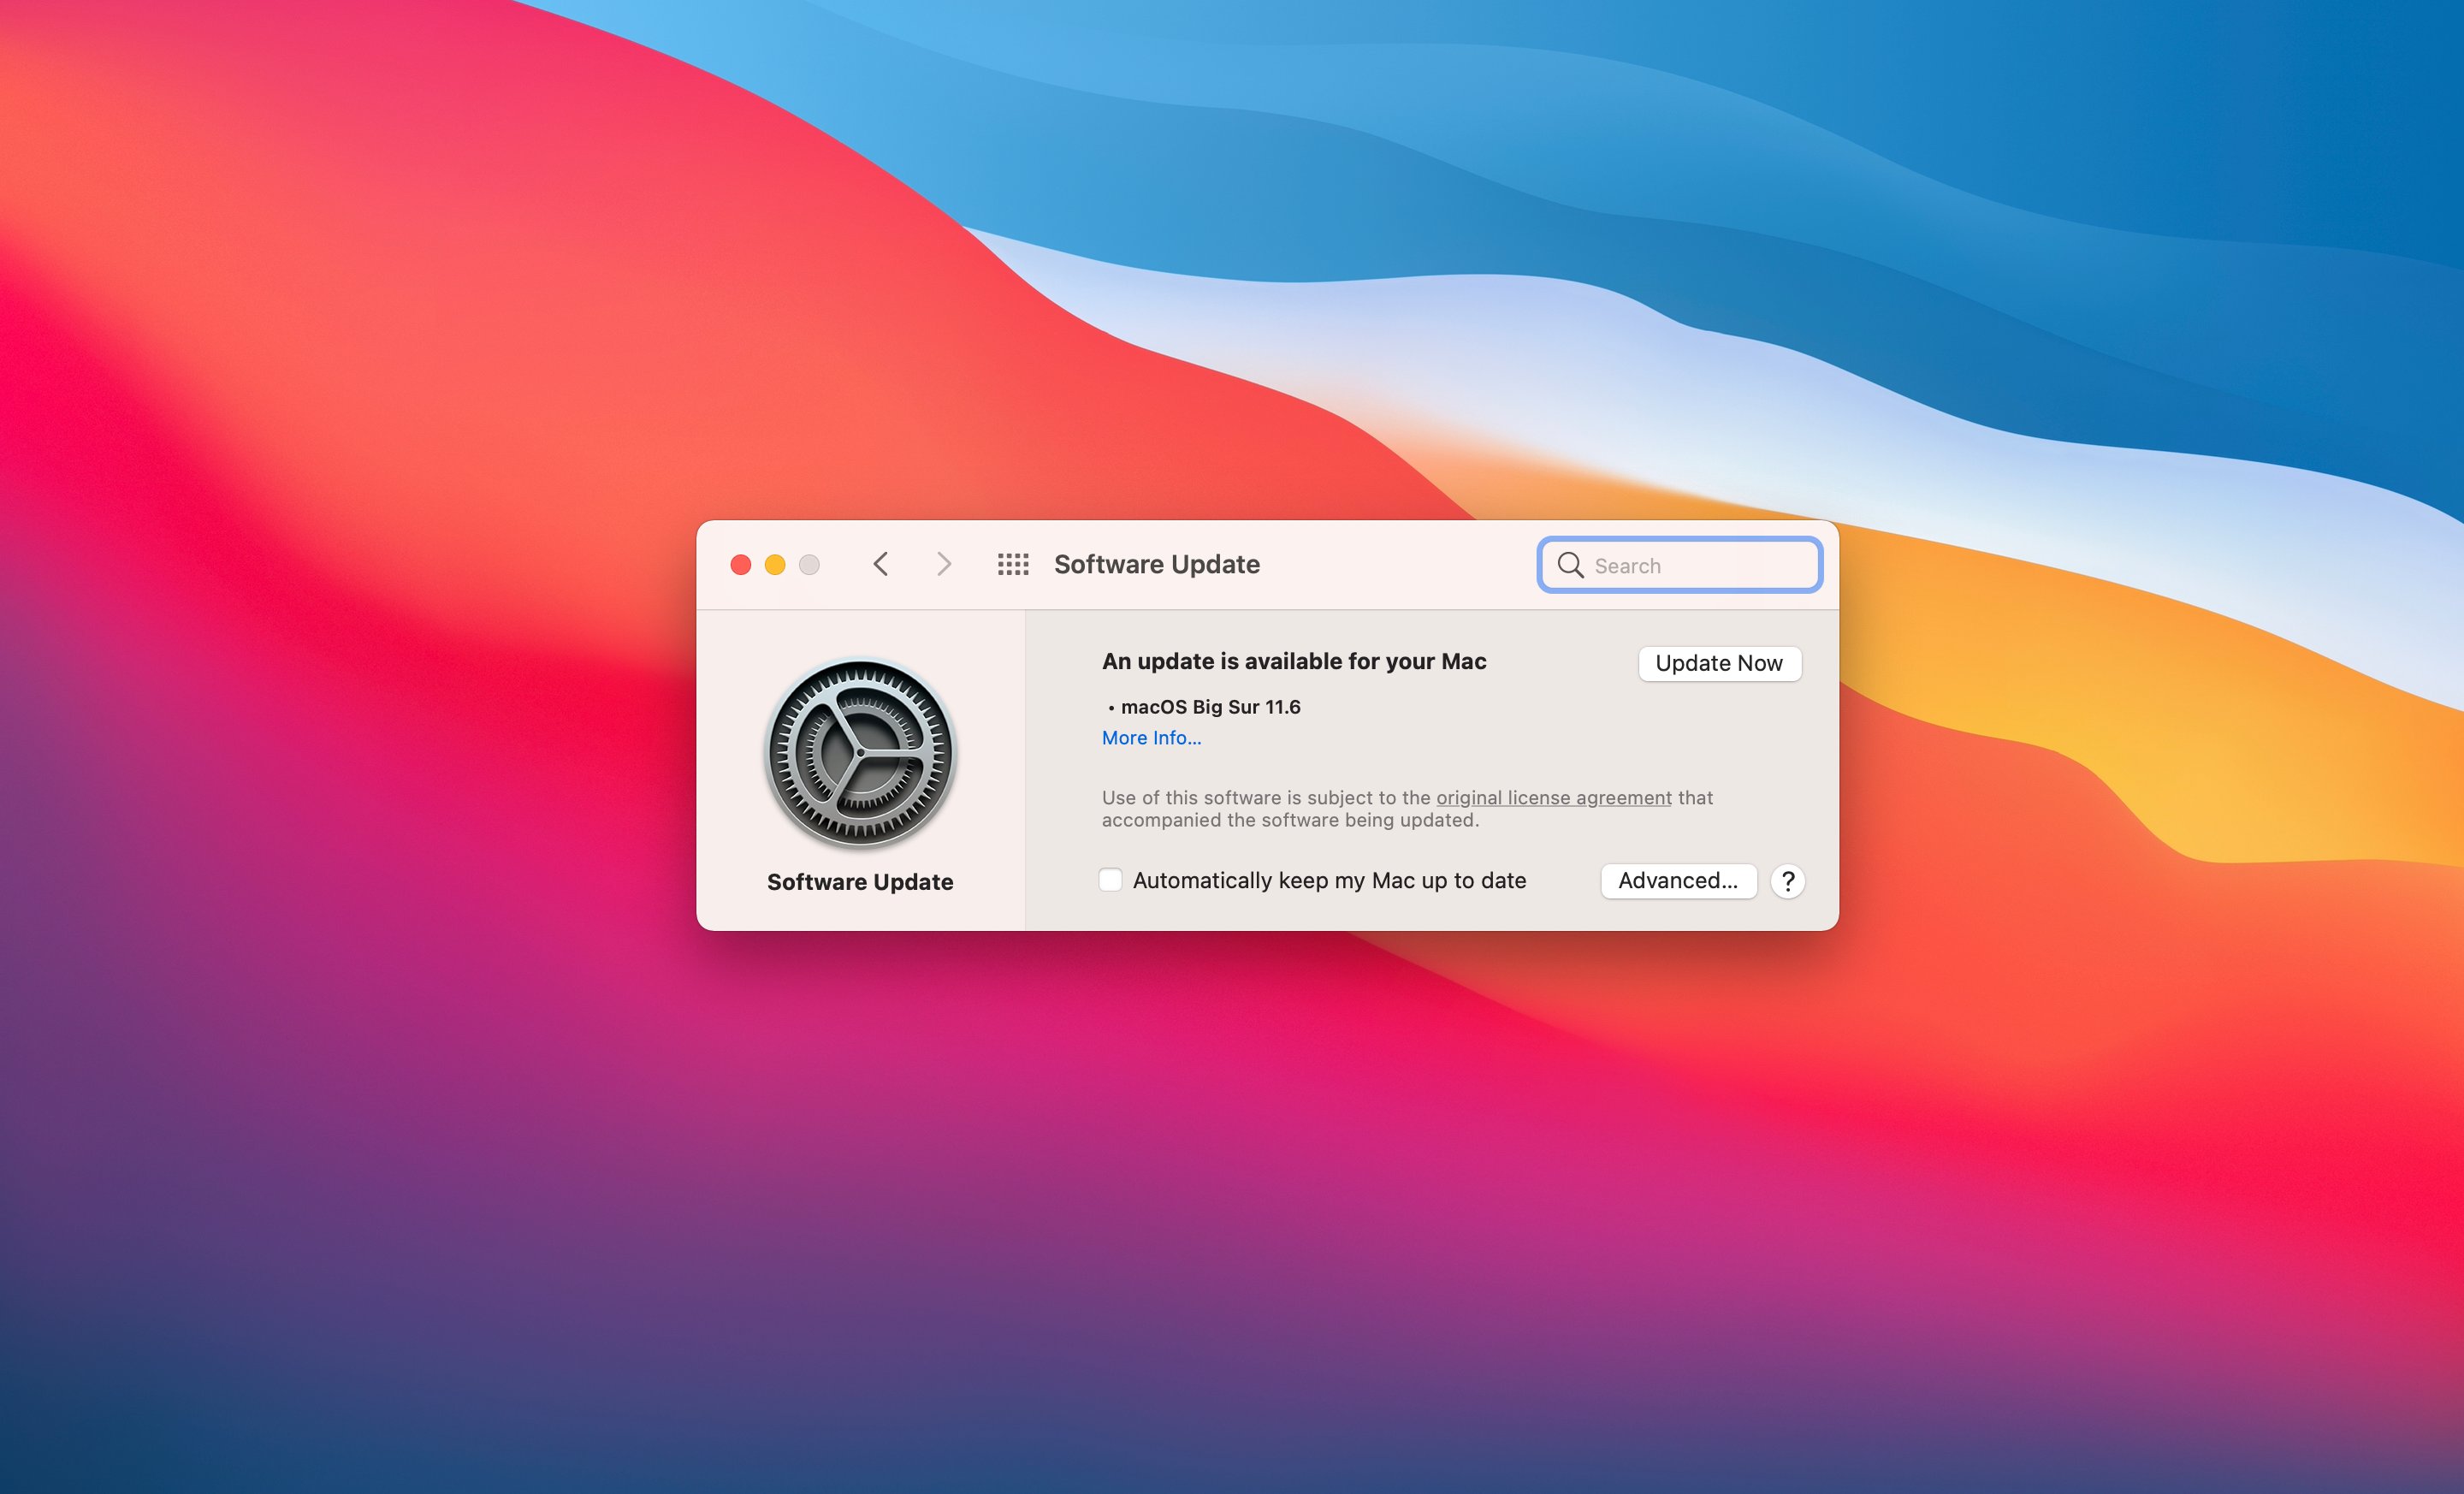 how to update mac os